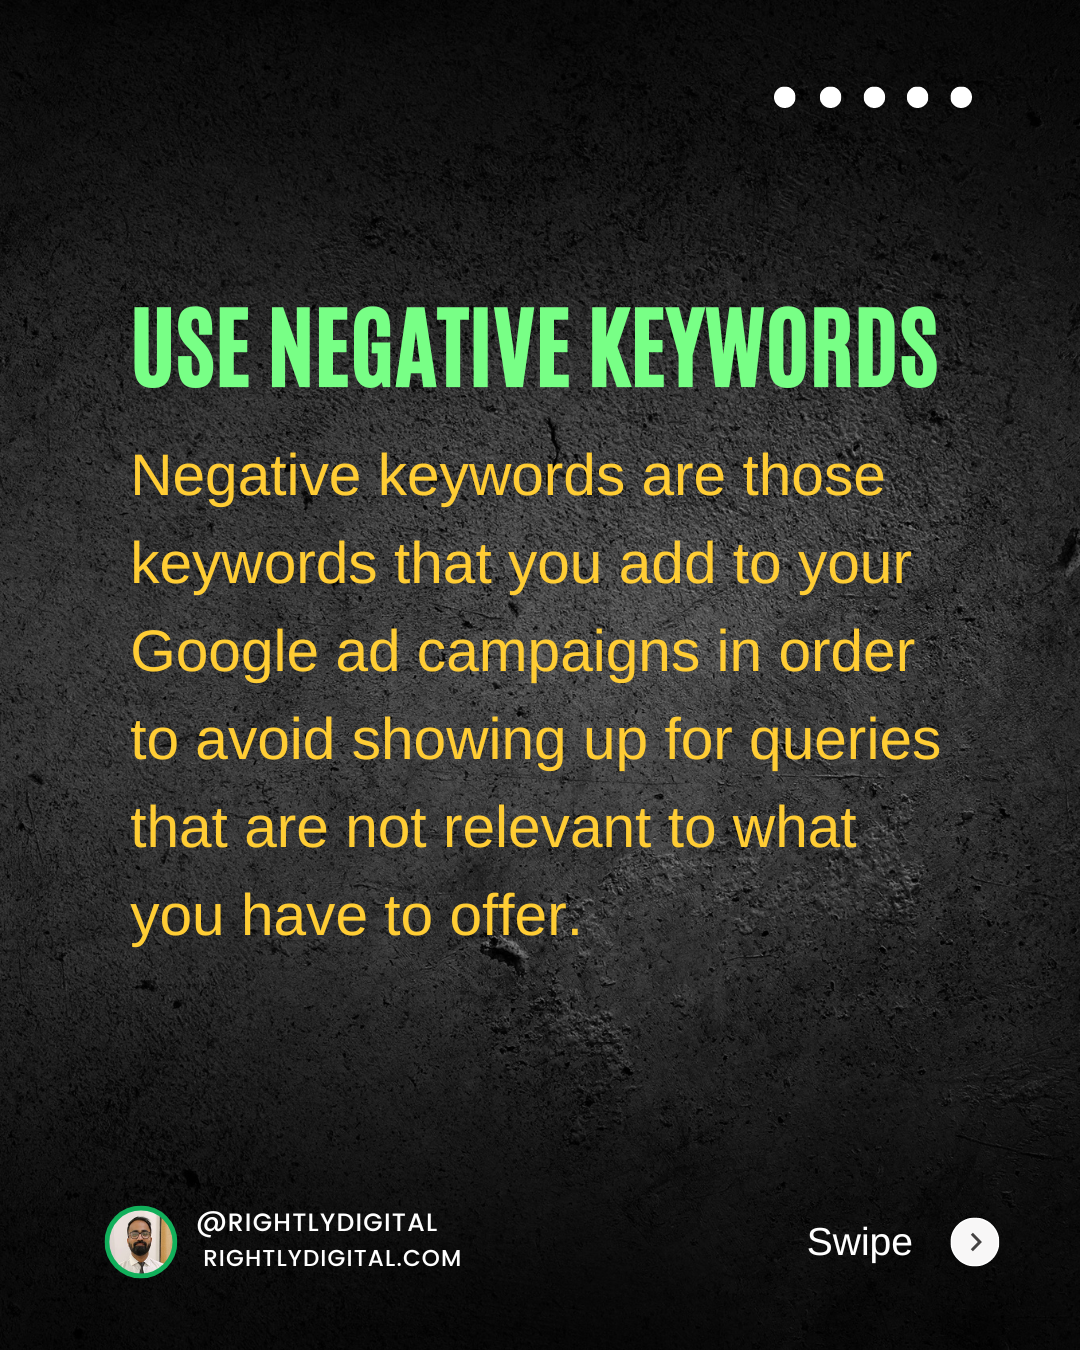 Negative keywords are those keywords that you add to your Google ad campaigns in order to avoid showing up for queries that are not relevant to what you have to of